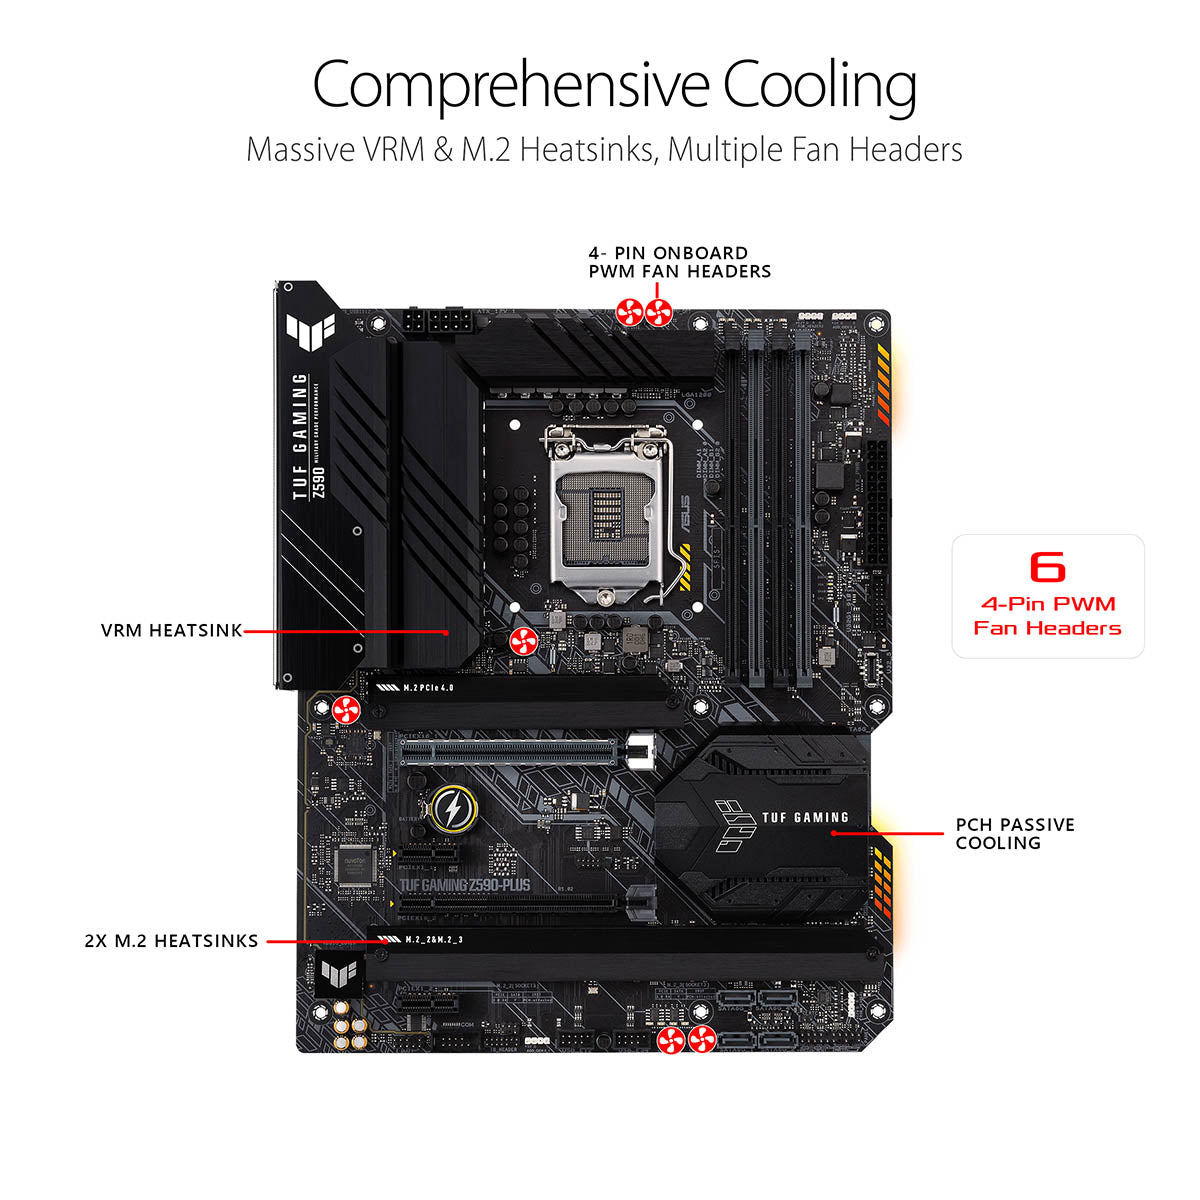 ASUS TUF Gaming Z590-Plus ATX LGA 1200 Motherboard with Thunderbolt 4 Support and AI Noise Cancelation